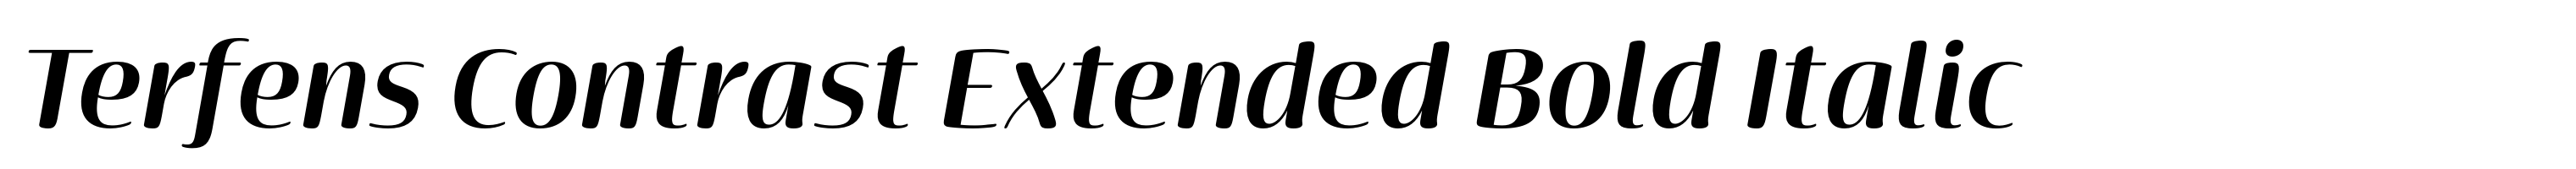 Terfens Contrast Extended Bold Italic